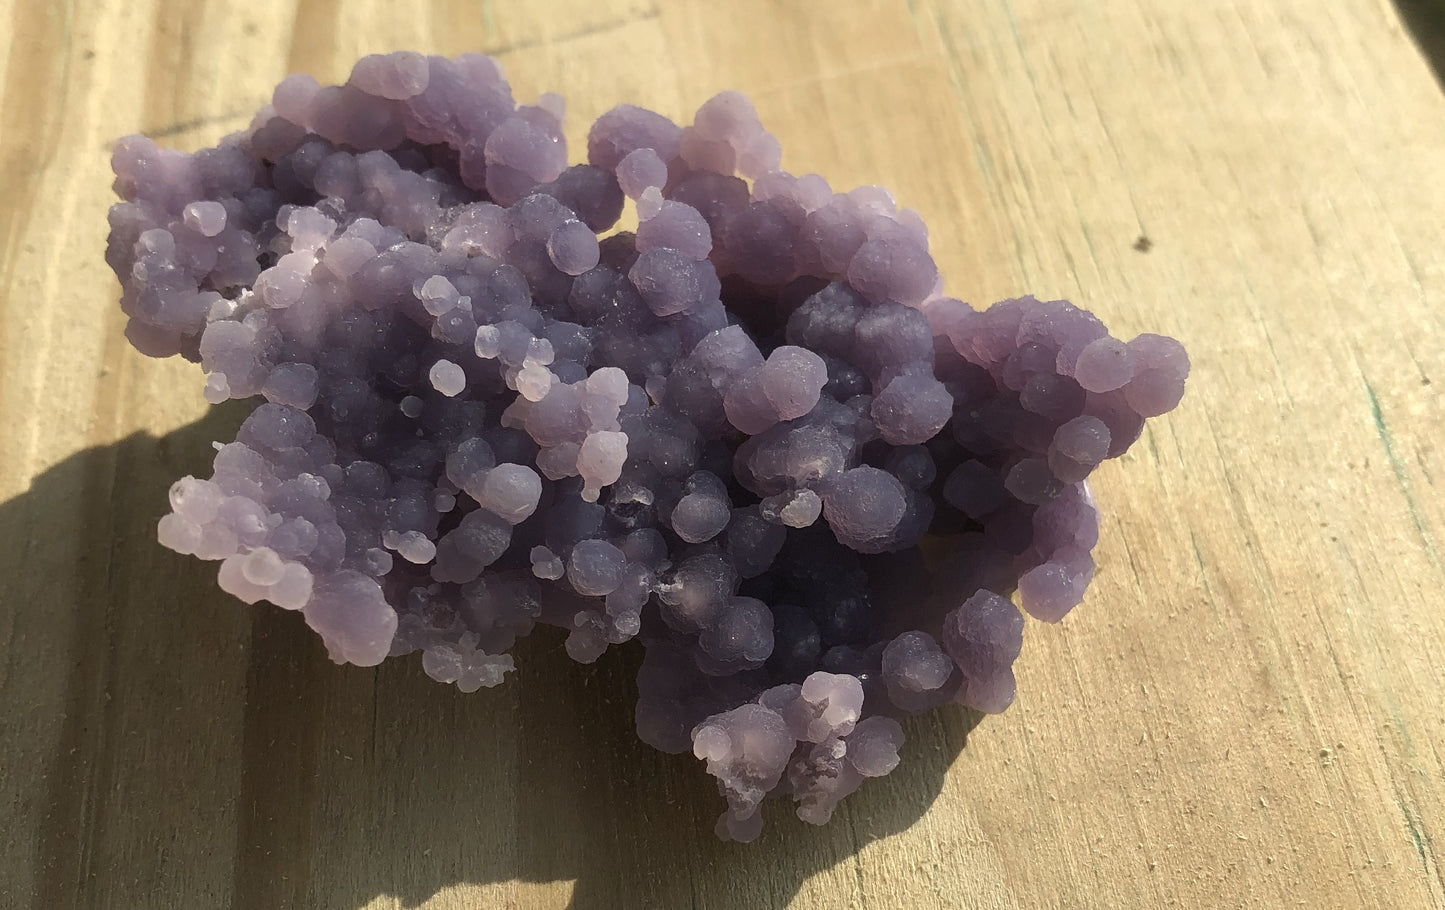 Botryoidal Chalcedony, aka Grape Agate 17 - Sulawesi, Indonesia | Of Coins & Crystals